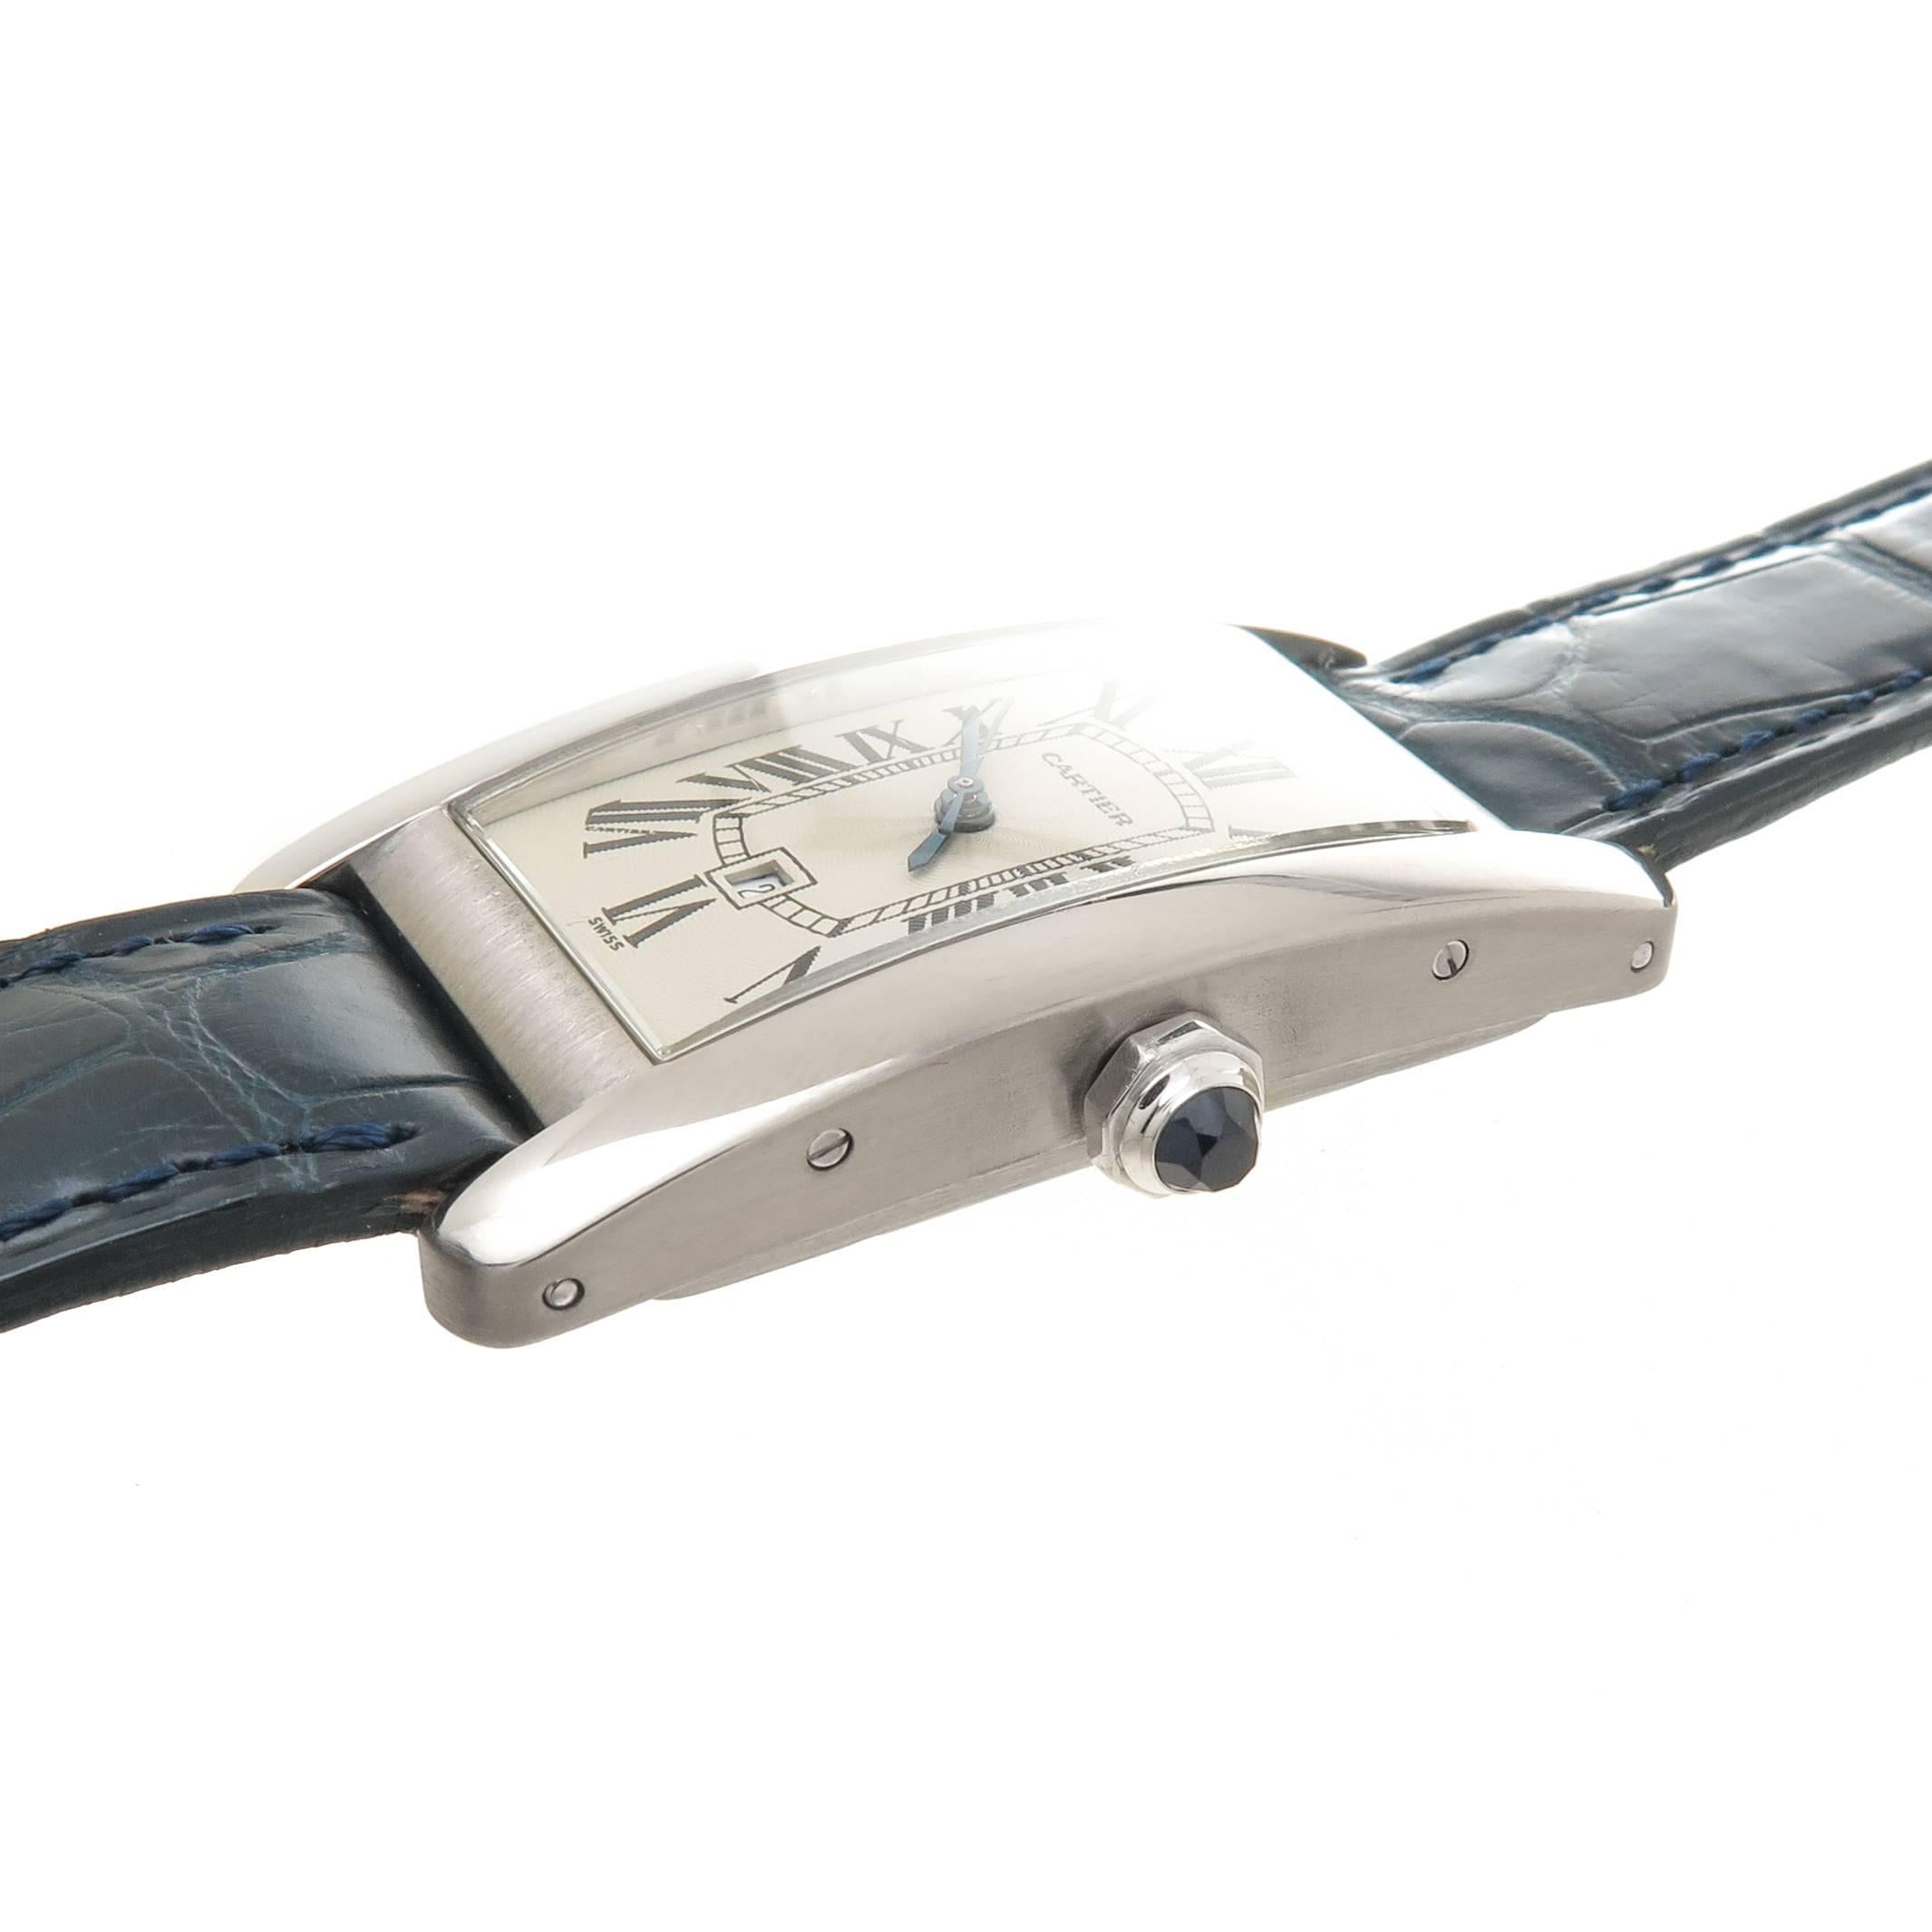 Circa 2000 Cartier Tank American Wrist Watch, 41 X 23 MM 18K White Gold water resistant case. Automatic, self Winding movement. Silver White Engine Turned Dial with Black Roman Numerals, sweep seconds hand, Calendar window at the 6 position and a